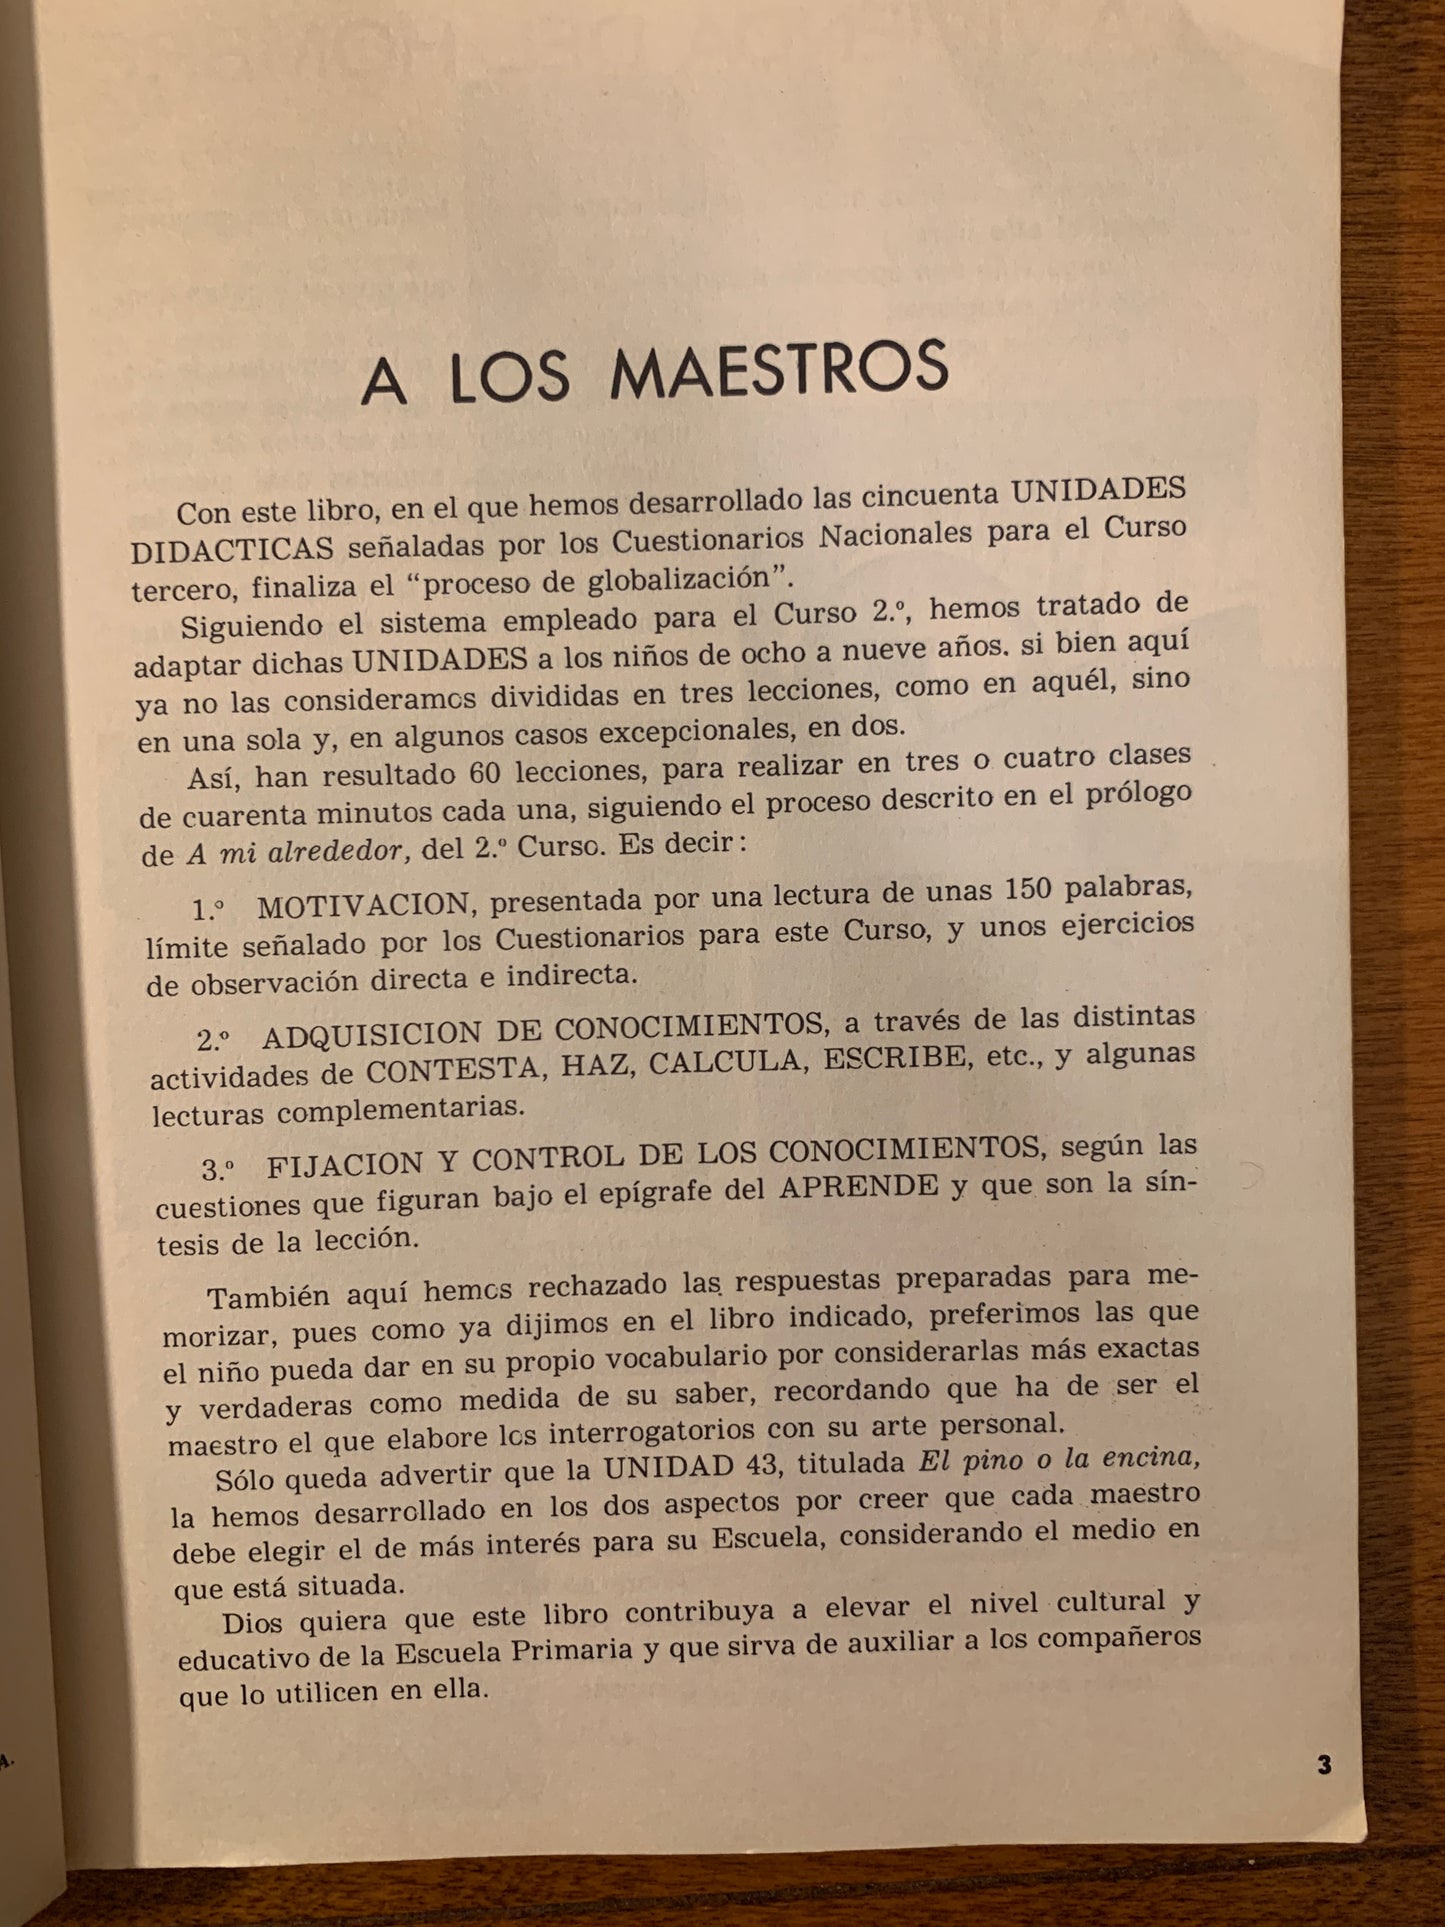 A Mi Alrededor 3er Curso 1967 (Spanish Reader) for 8 and 9 Year olds